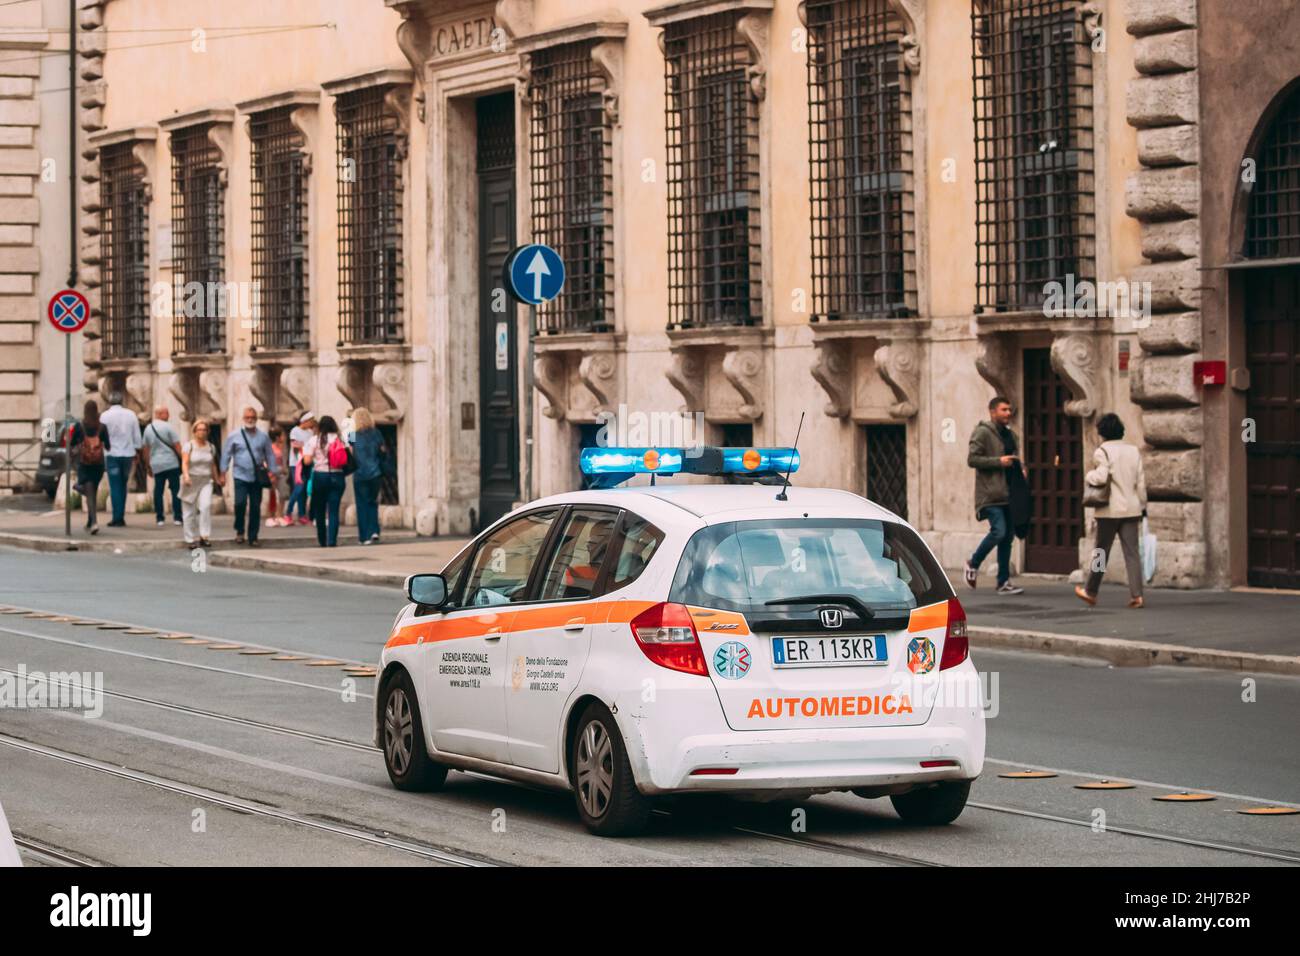 Rome Italy Moving With Siren Emergency Ambulance Small Honda Car On Street Emergency Lights System Els Activated Stock Photo Alamy